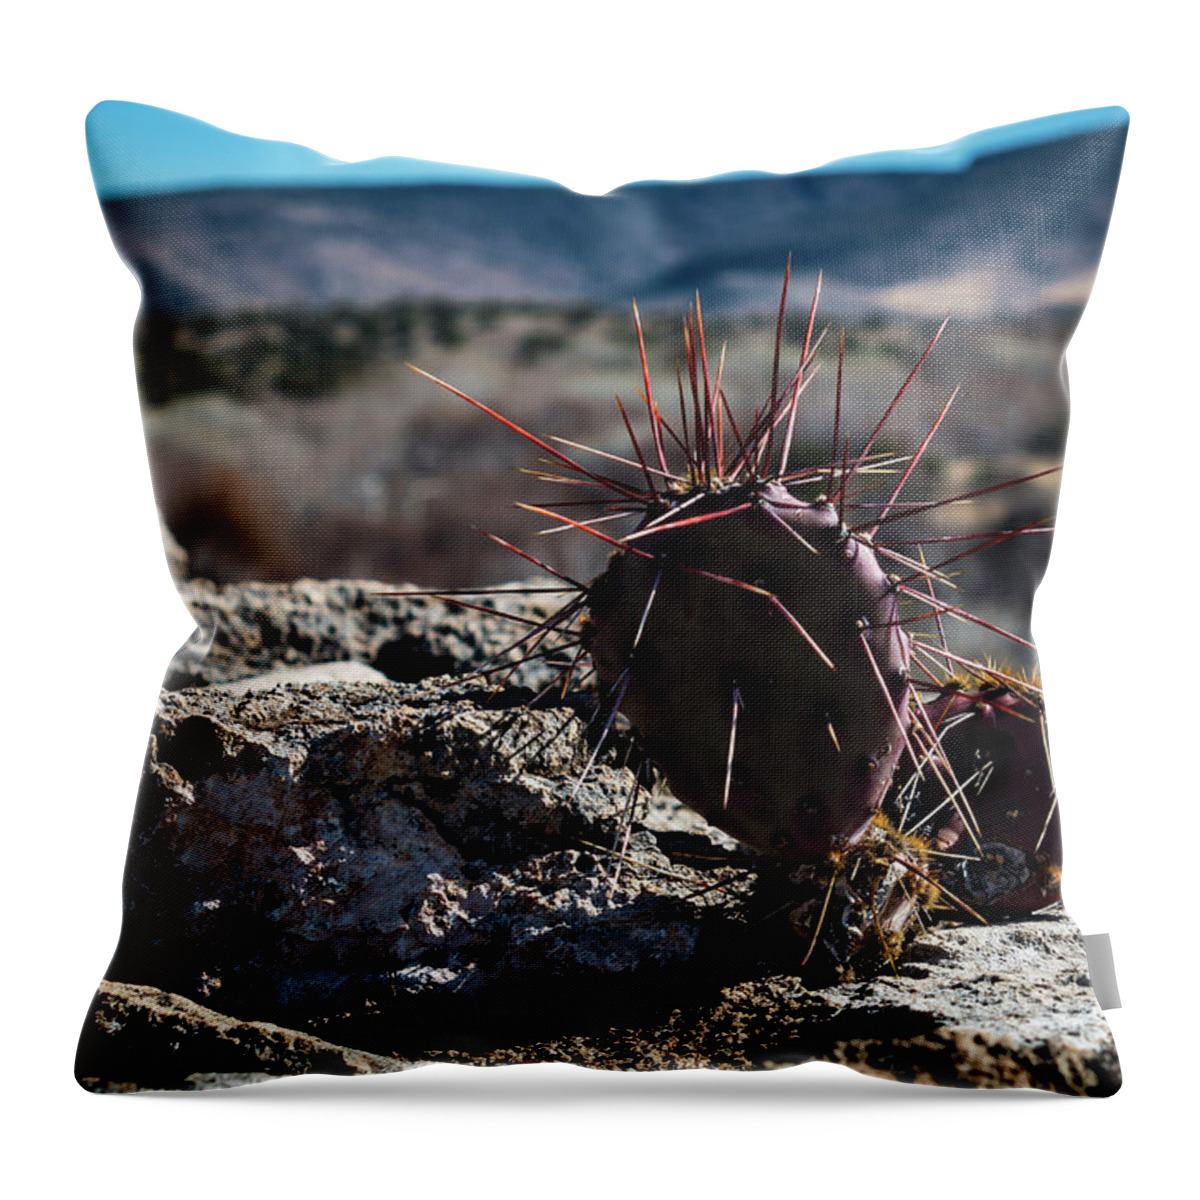 Prickly Throw Pillow featuring the photograph Itty Bitty Prickly Pear Cactus by Susie Weaver